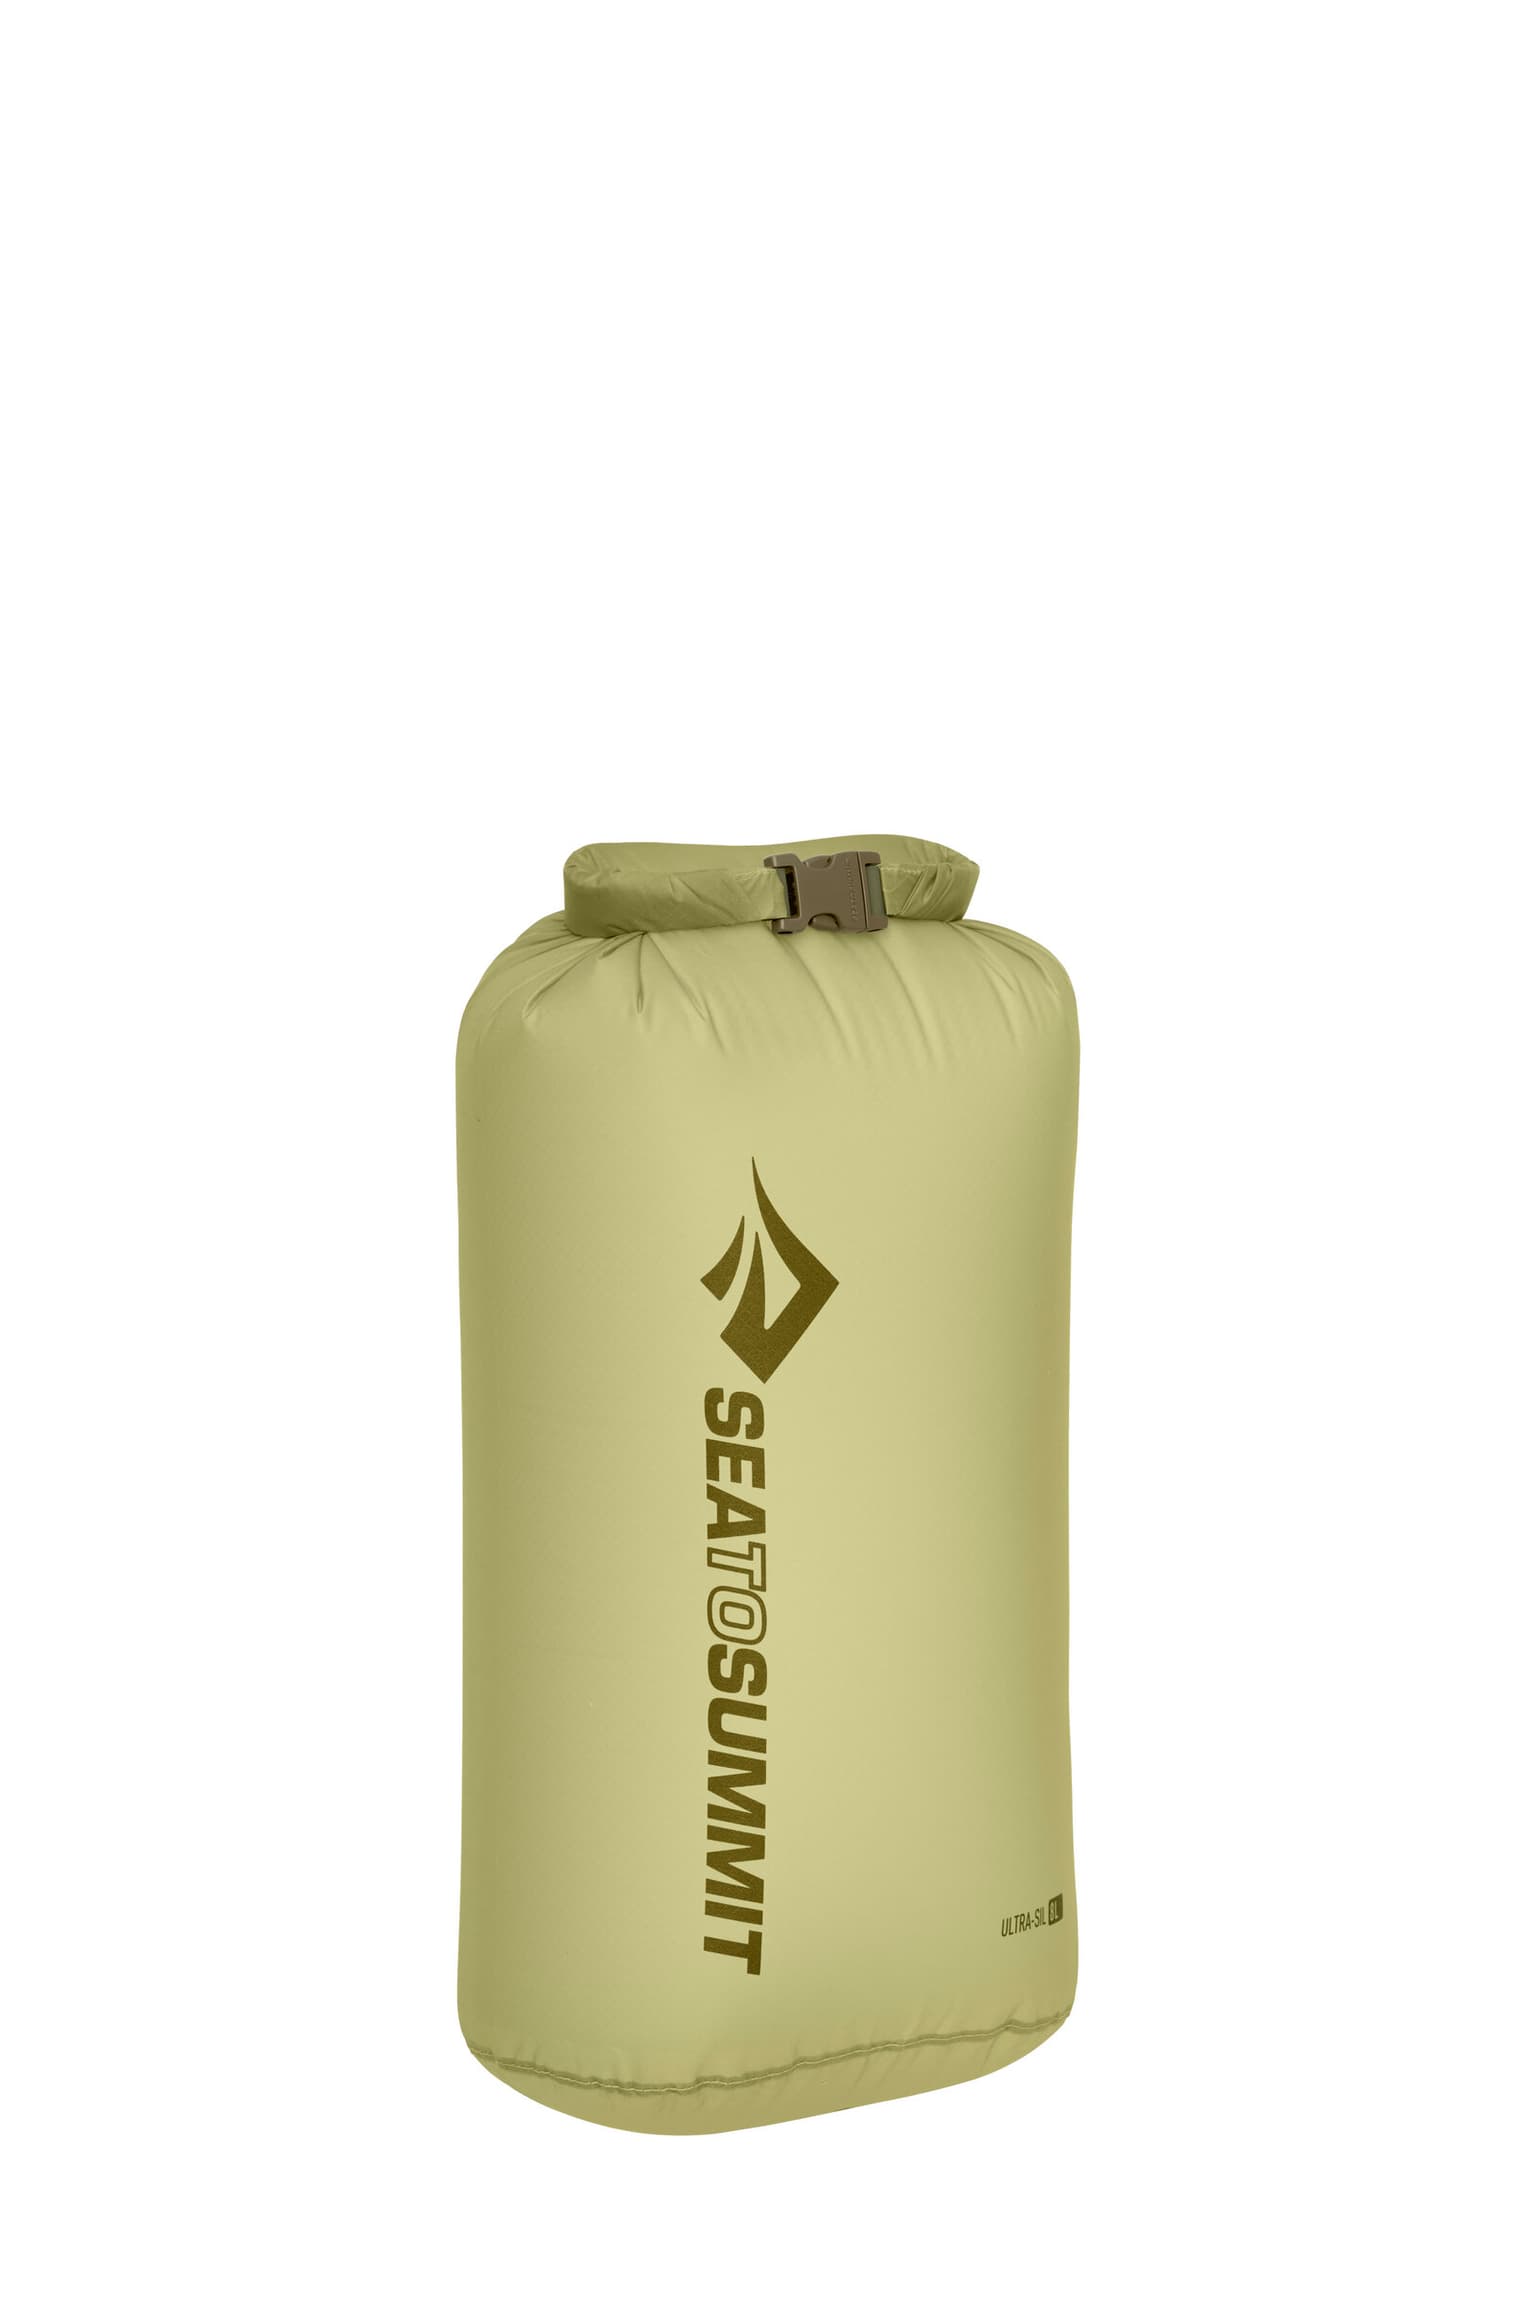 Sea To Summit Sea To Summit Ultra-Sil Dry Bag 8L Dry Bag vert-mousse 1